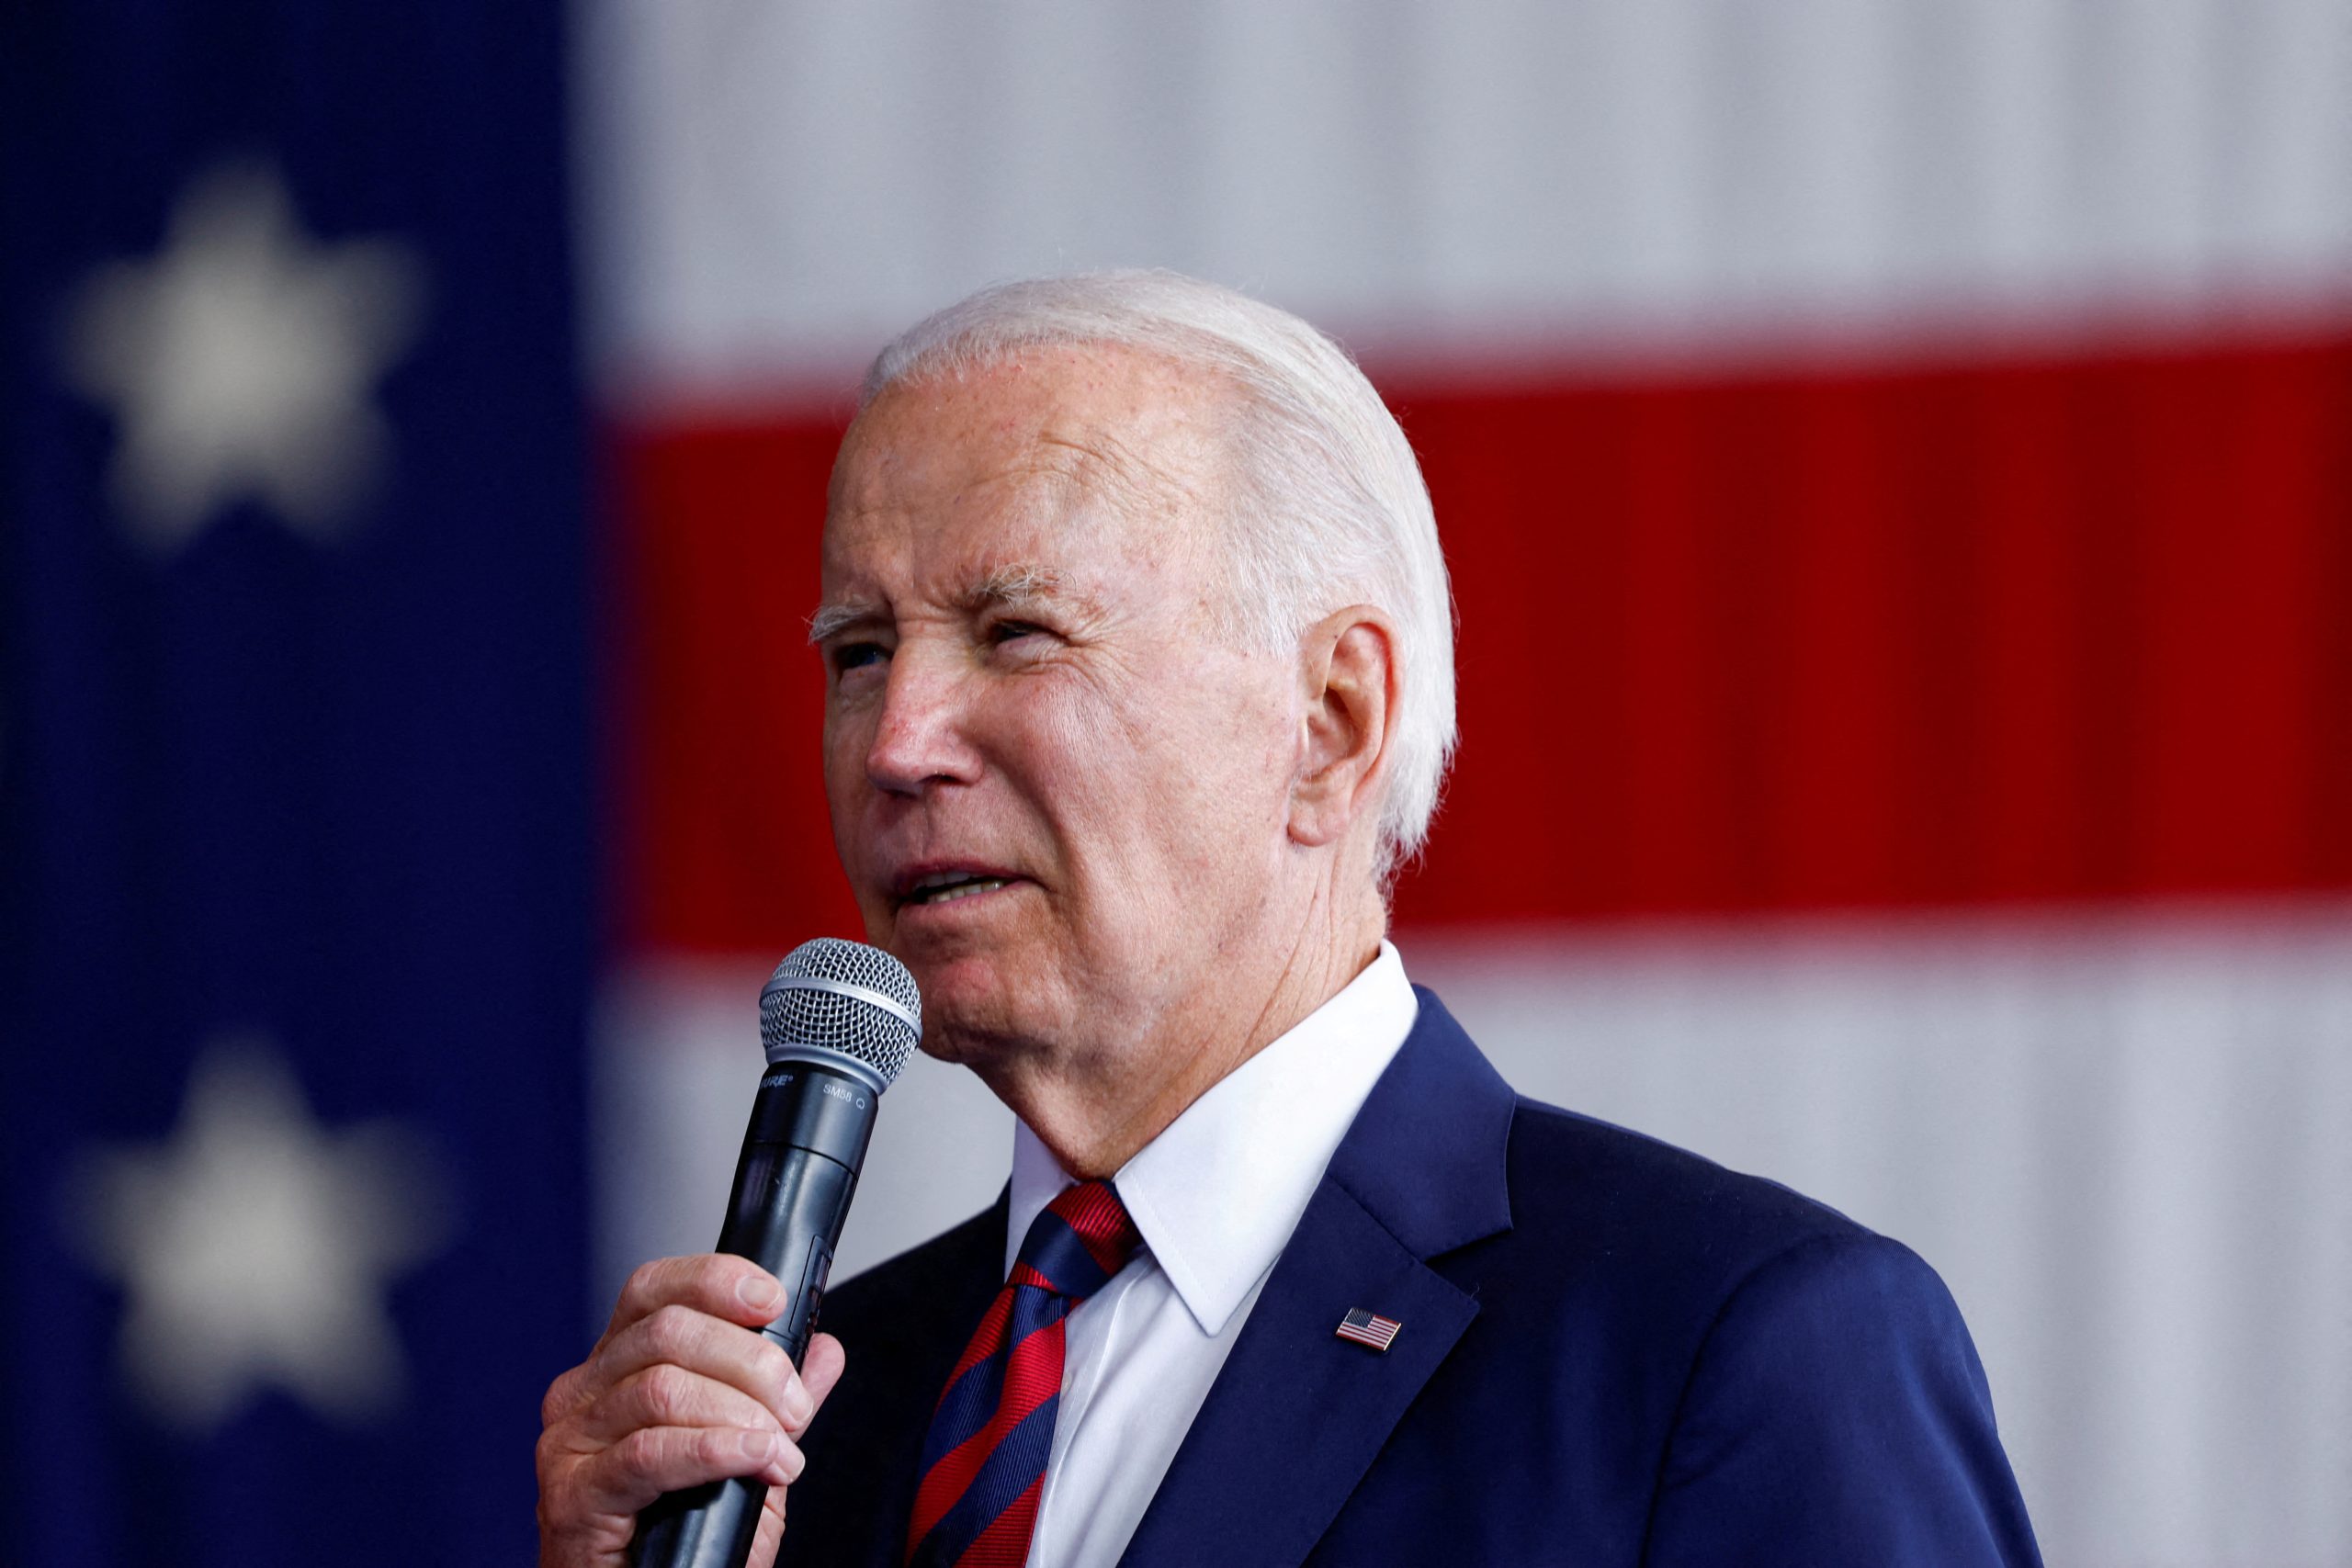 Biden Decides on Course of Action in Response to Loss of U.S. Forces in Jordan